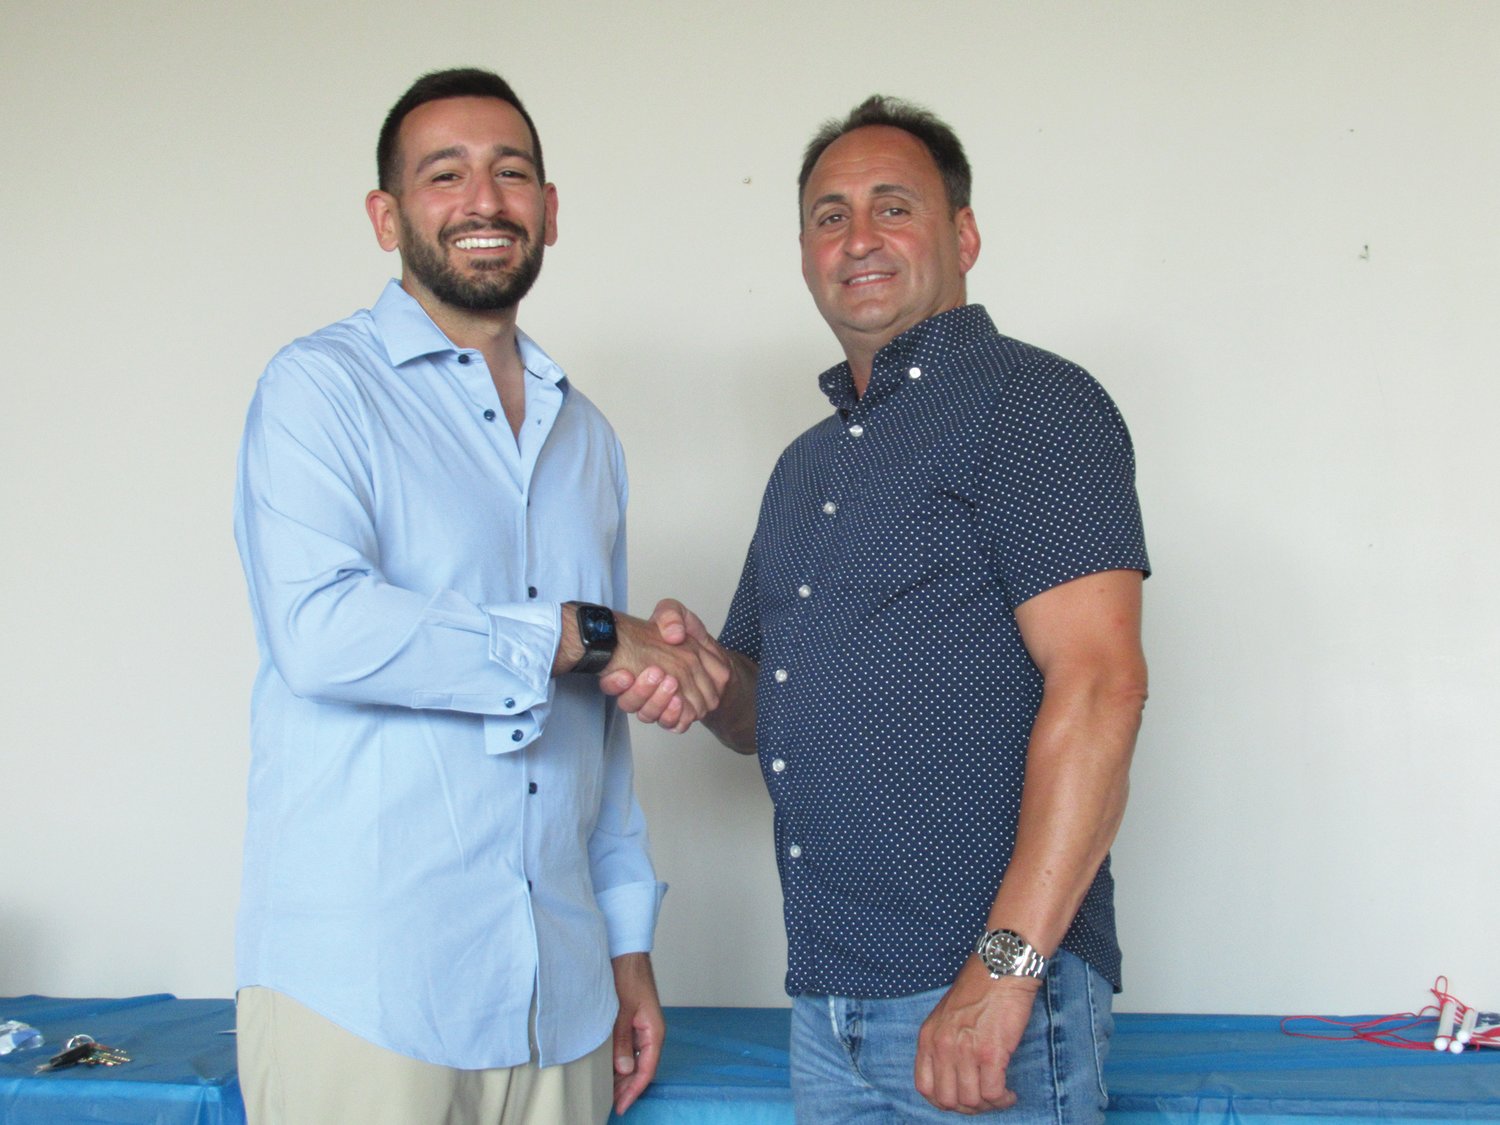 WARM WELCOME: Joseph Polisena Jr., Vice-President of Johnston Town Council, congratulates Stephen Mandarelli upon being unanimously elected to the Johnston Democratic Town Committee (JDTC).